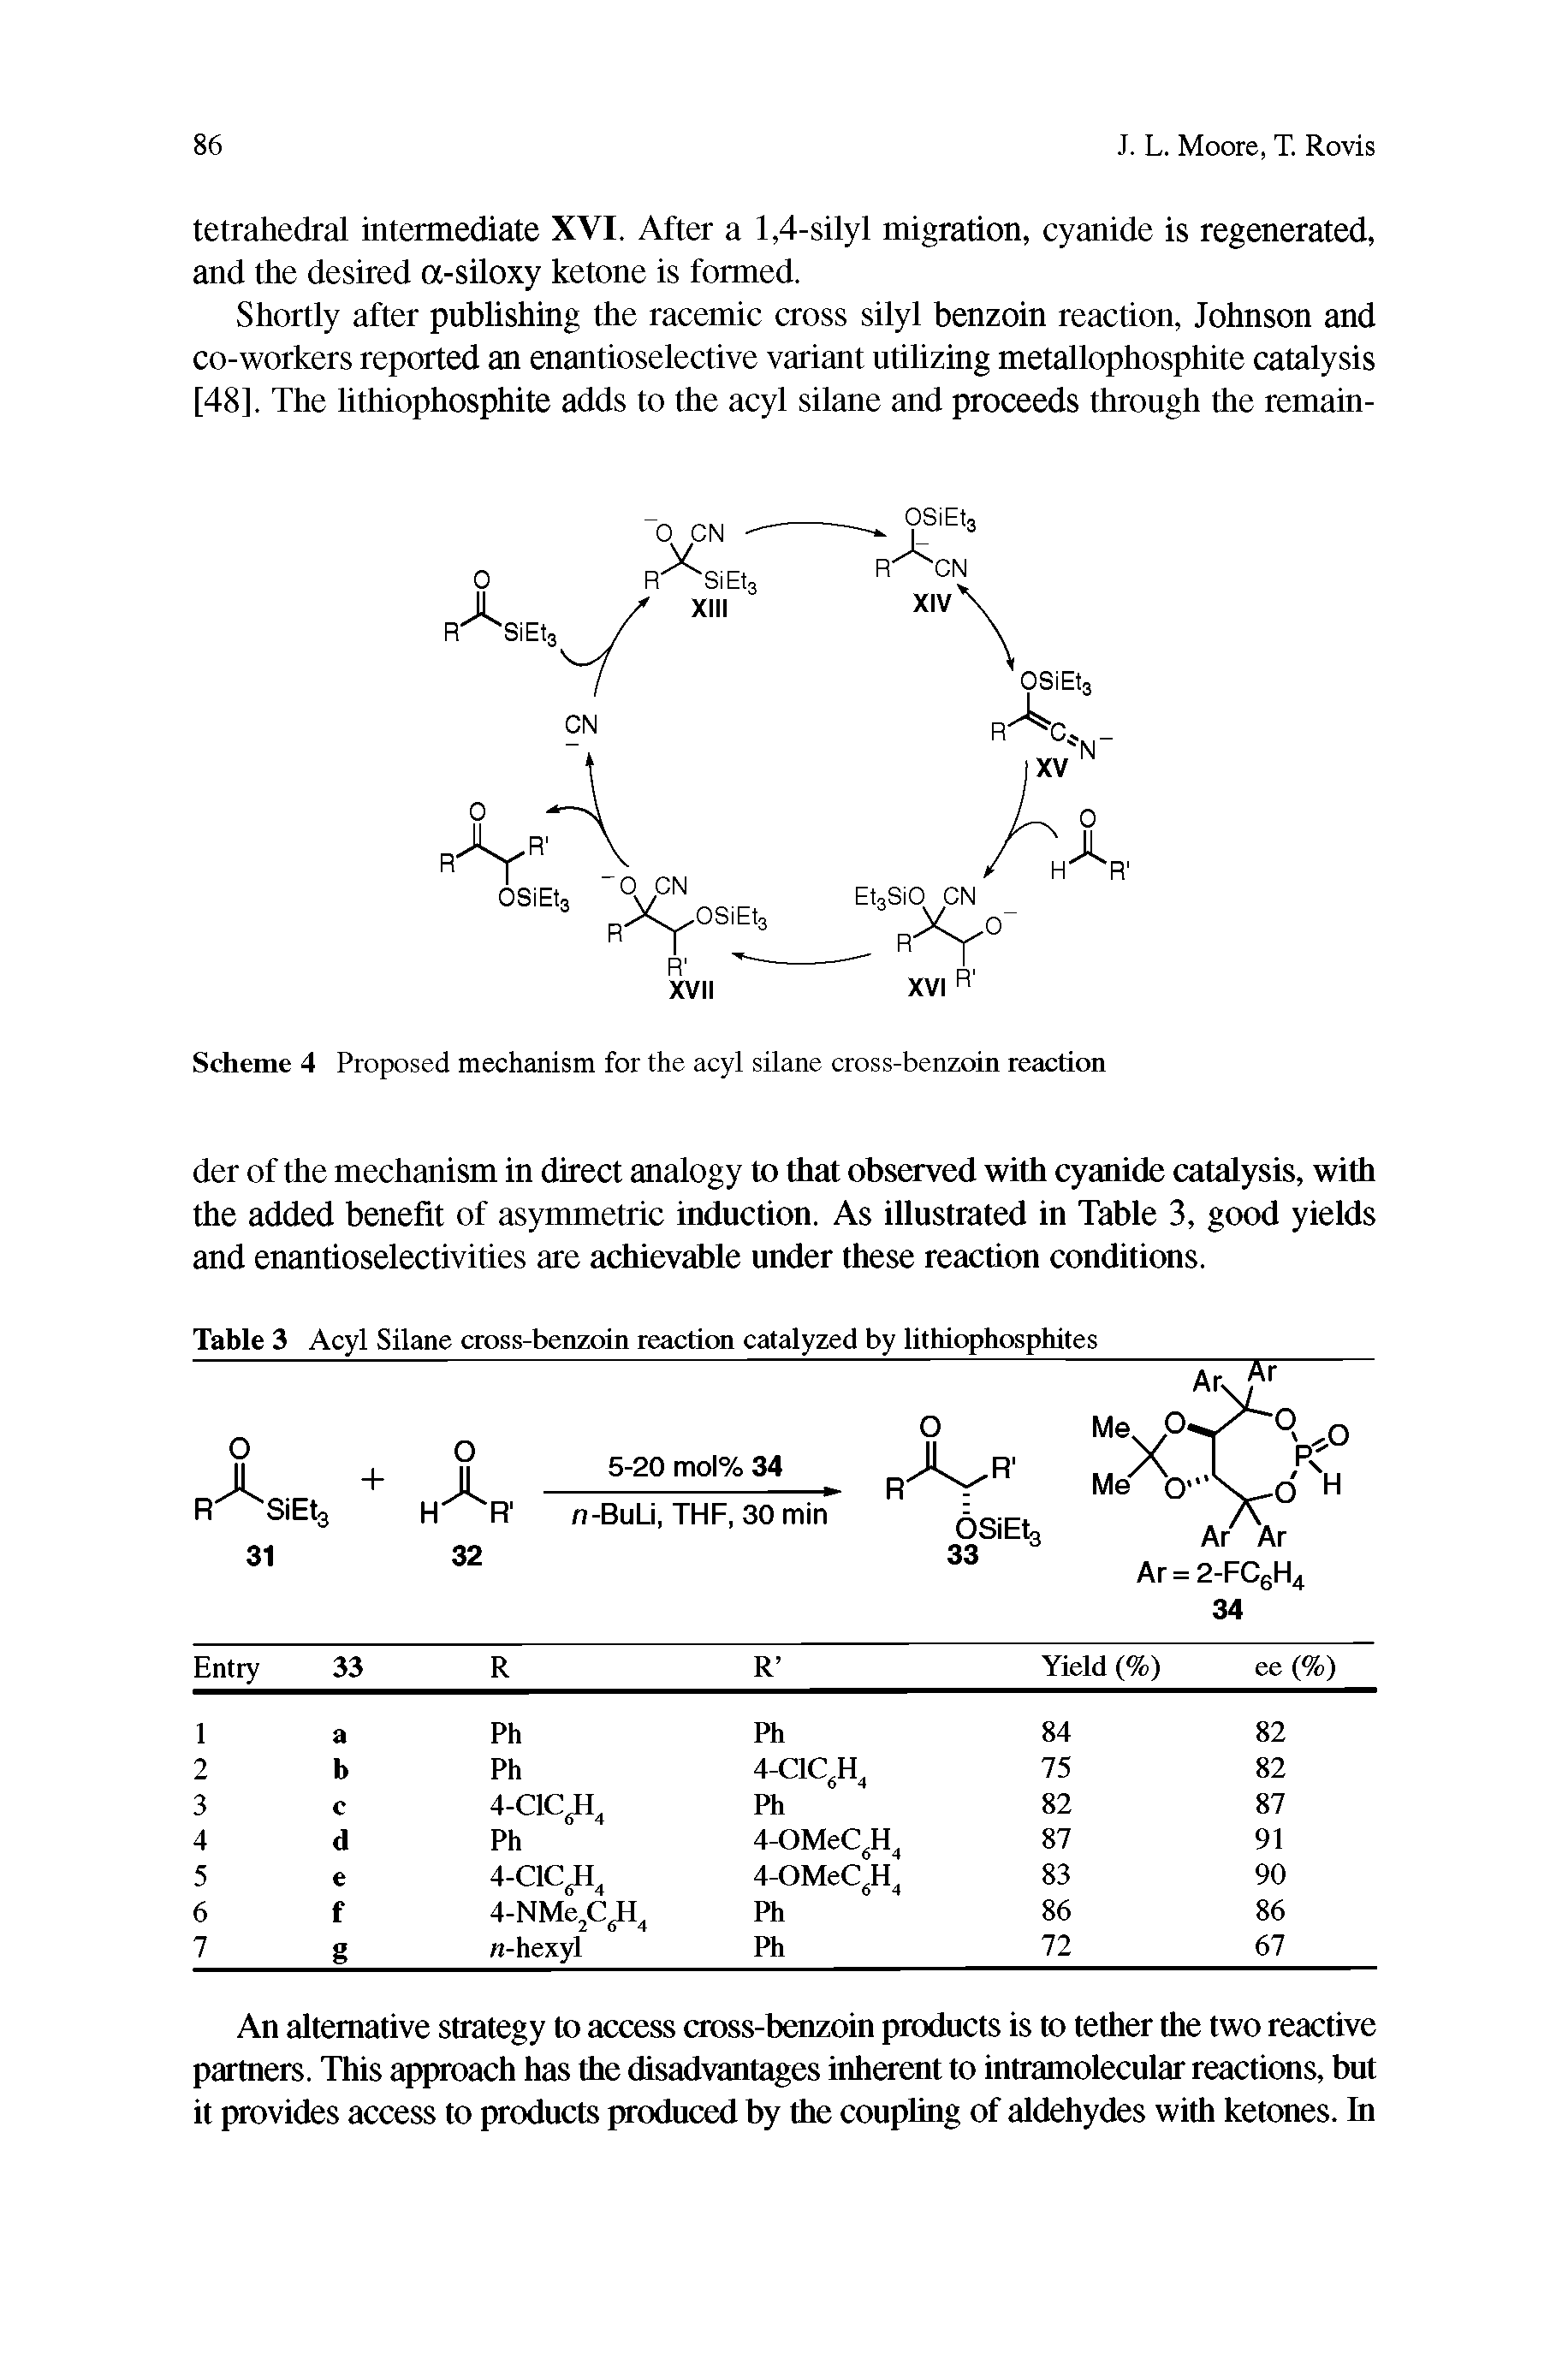 Table 3 Acyl Silane cross-benzoin reaction catalyzed by lithiophosphites...